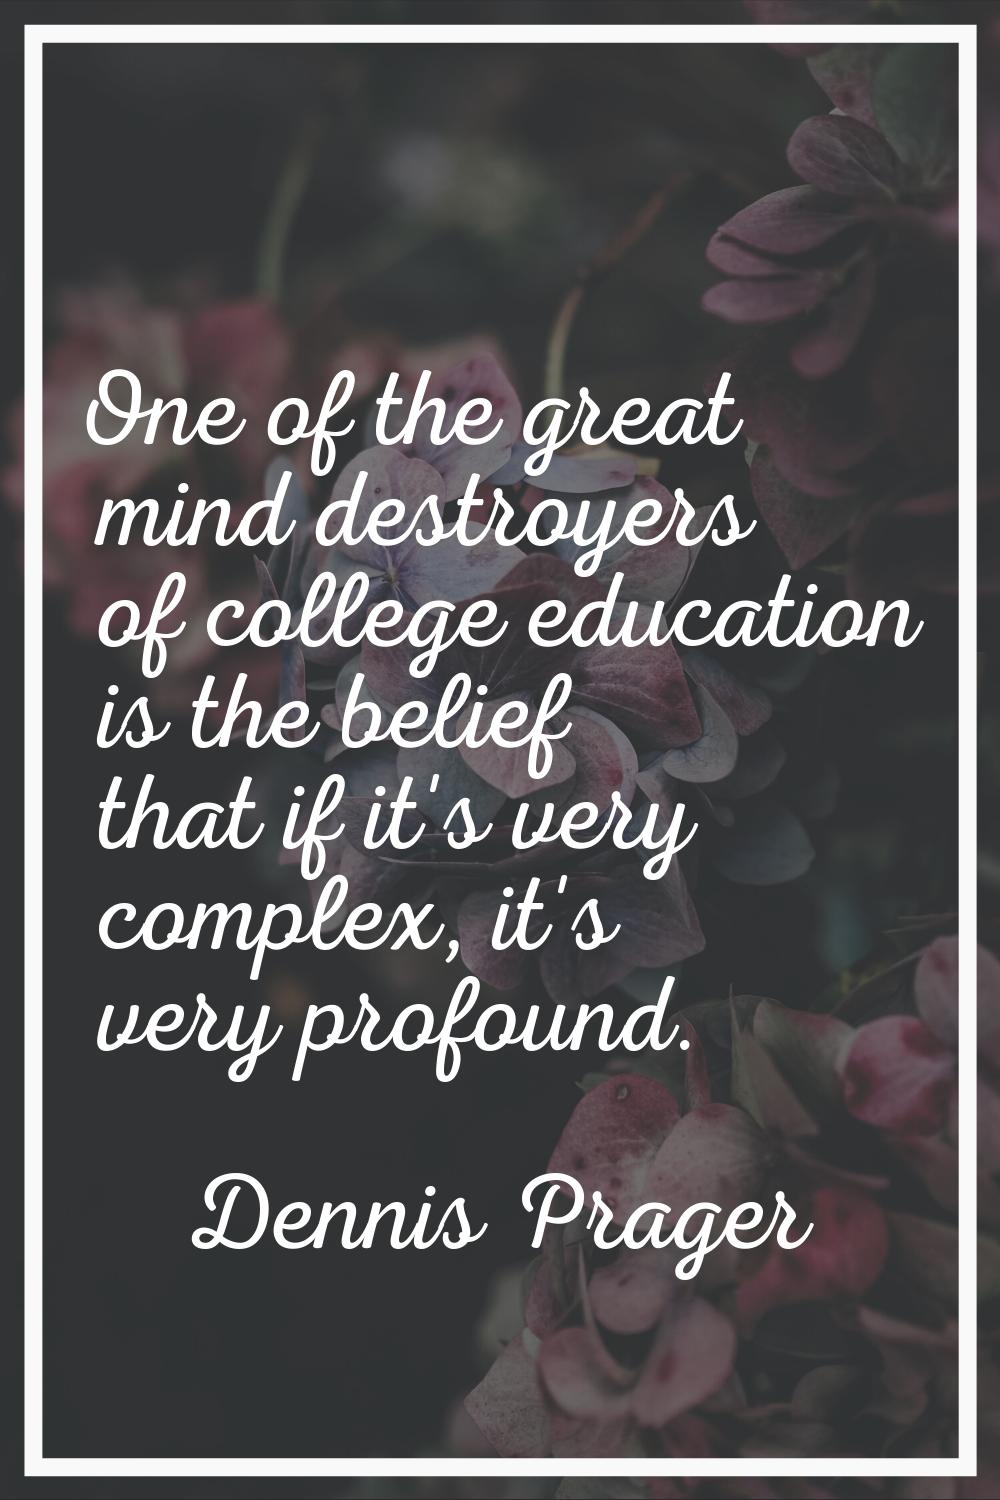 One of the great mind destroyers of college education is the belief that if it's very complex, it's